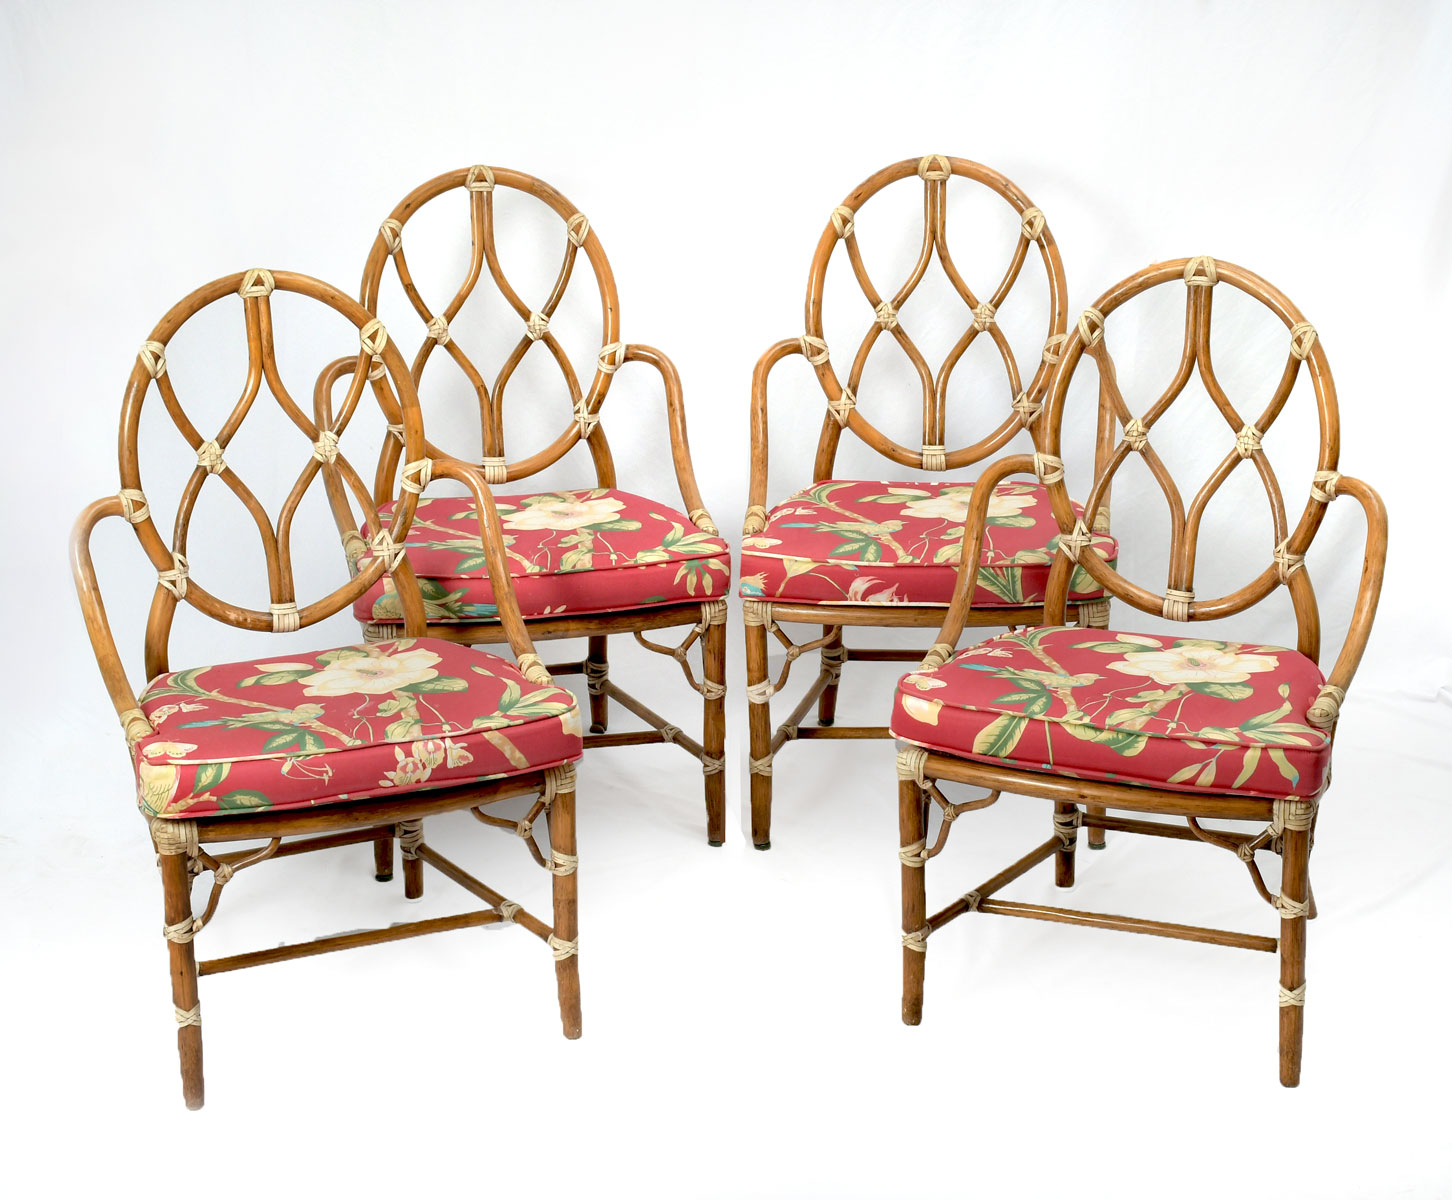 4 MAGUIRE BAMBOO & CANE CHAIRS: